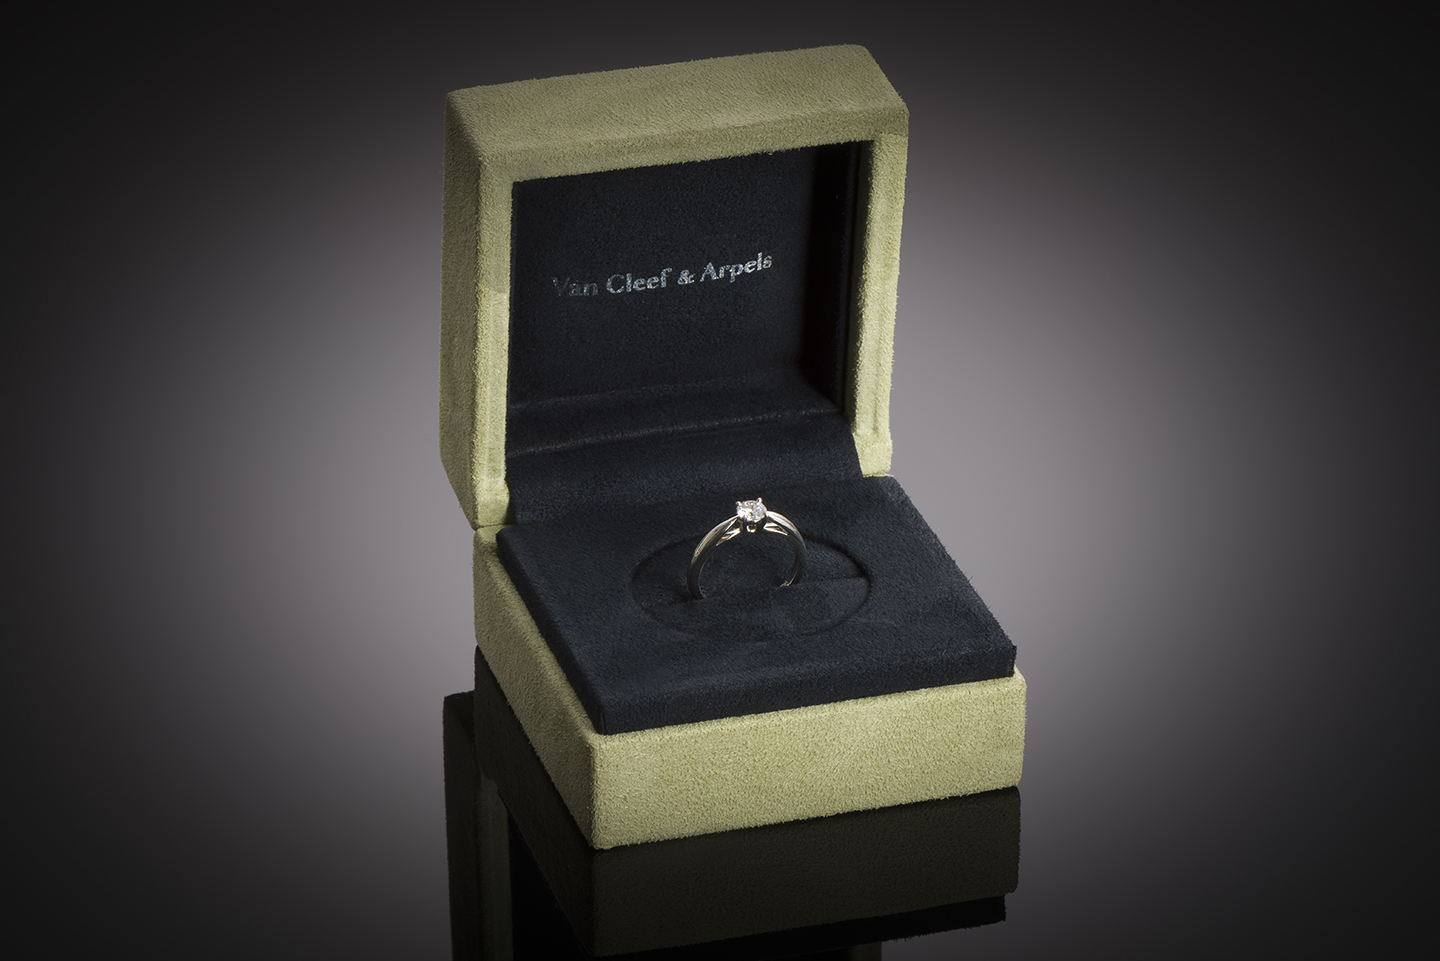 Van Cleef & Arpels diamond solitaire in platinum accompanied by a GIA certificate (E VVS2), box and original documents-2